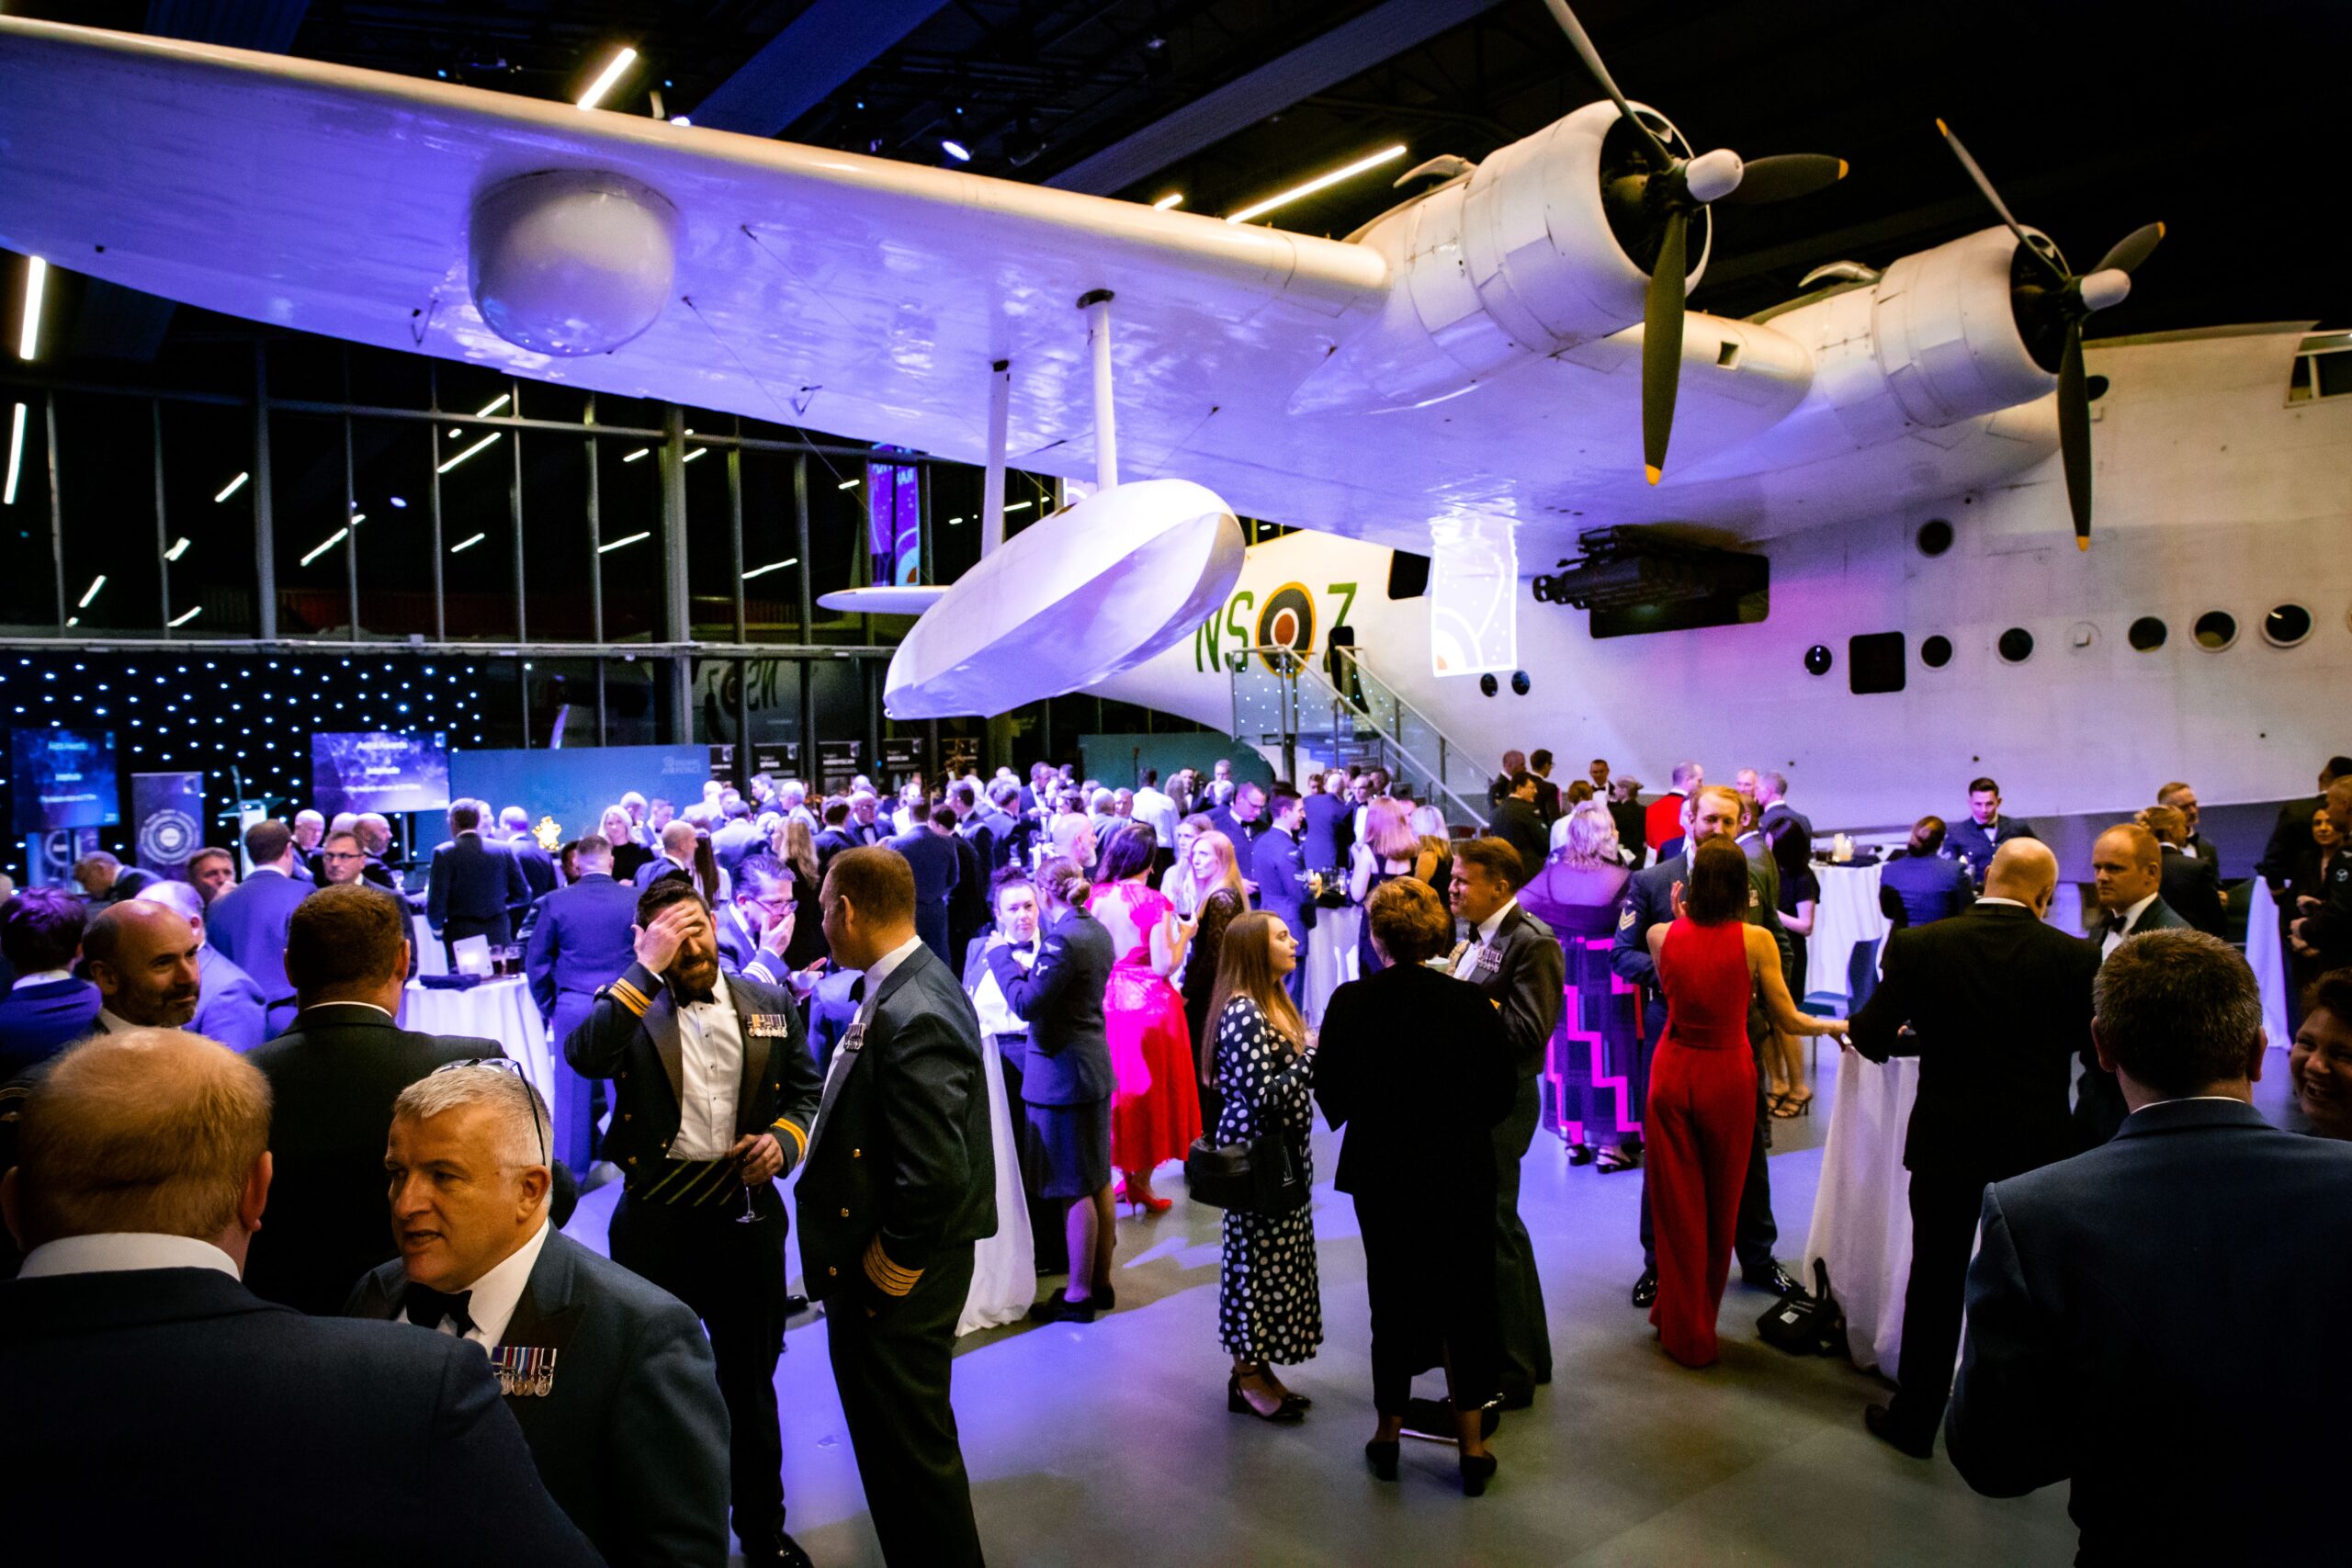 Royal Air Force Museum Conference and Events